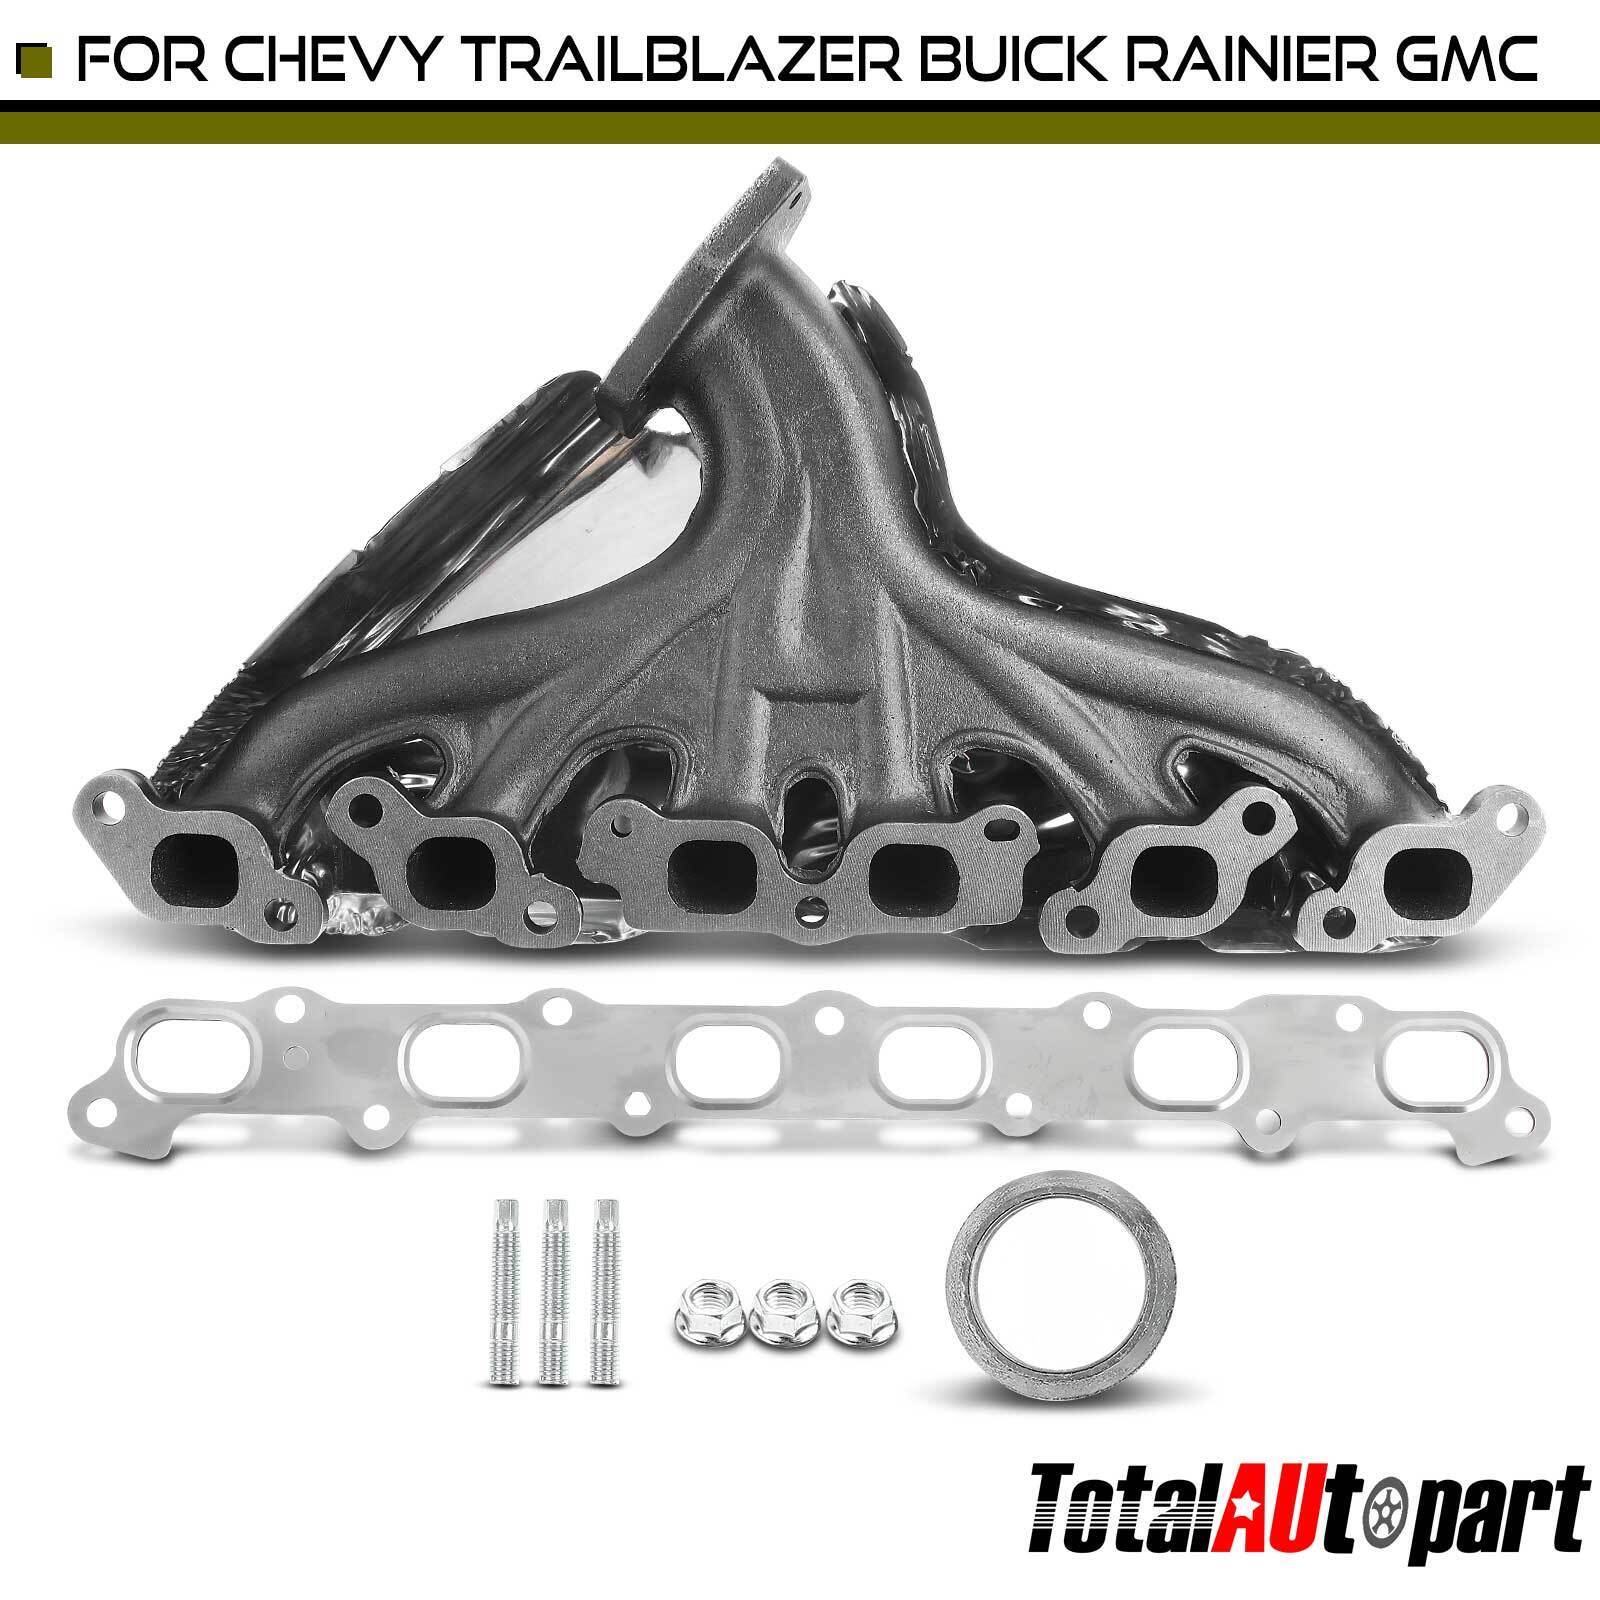 Exhaust Manifold with Gasket Kit for Chevrolet Trailblazer EXT GMC Olds L6 4.2L